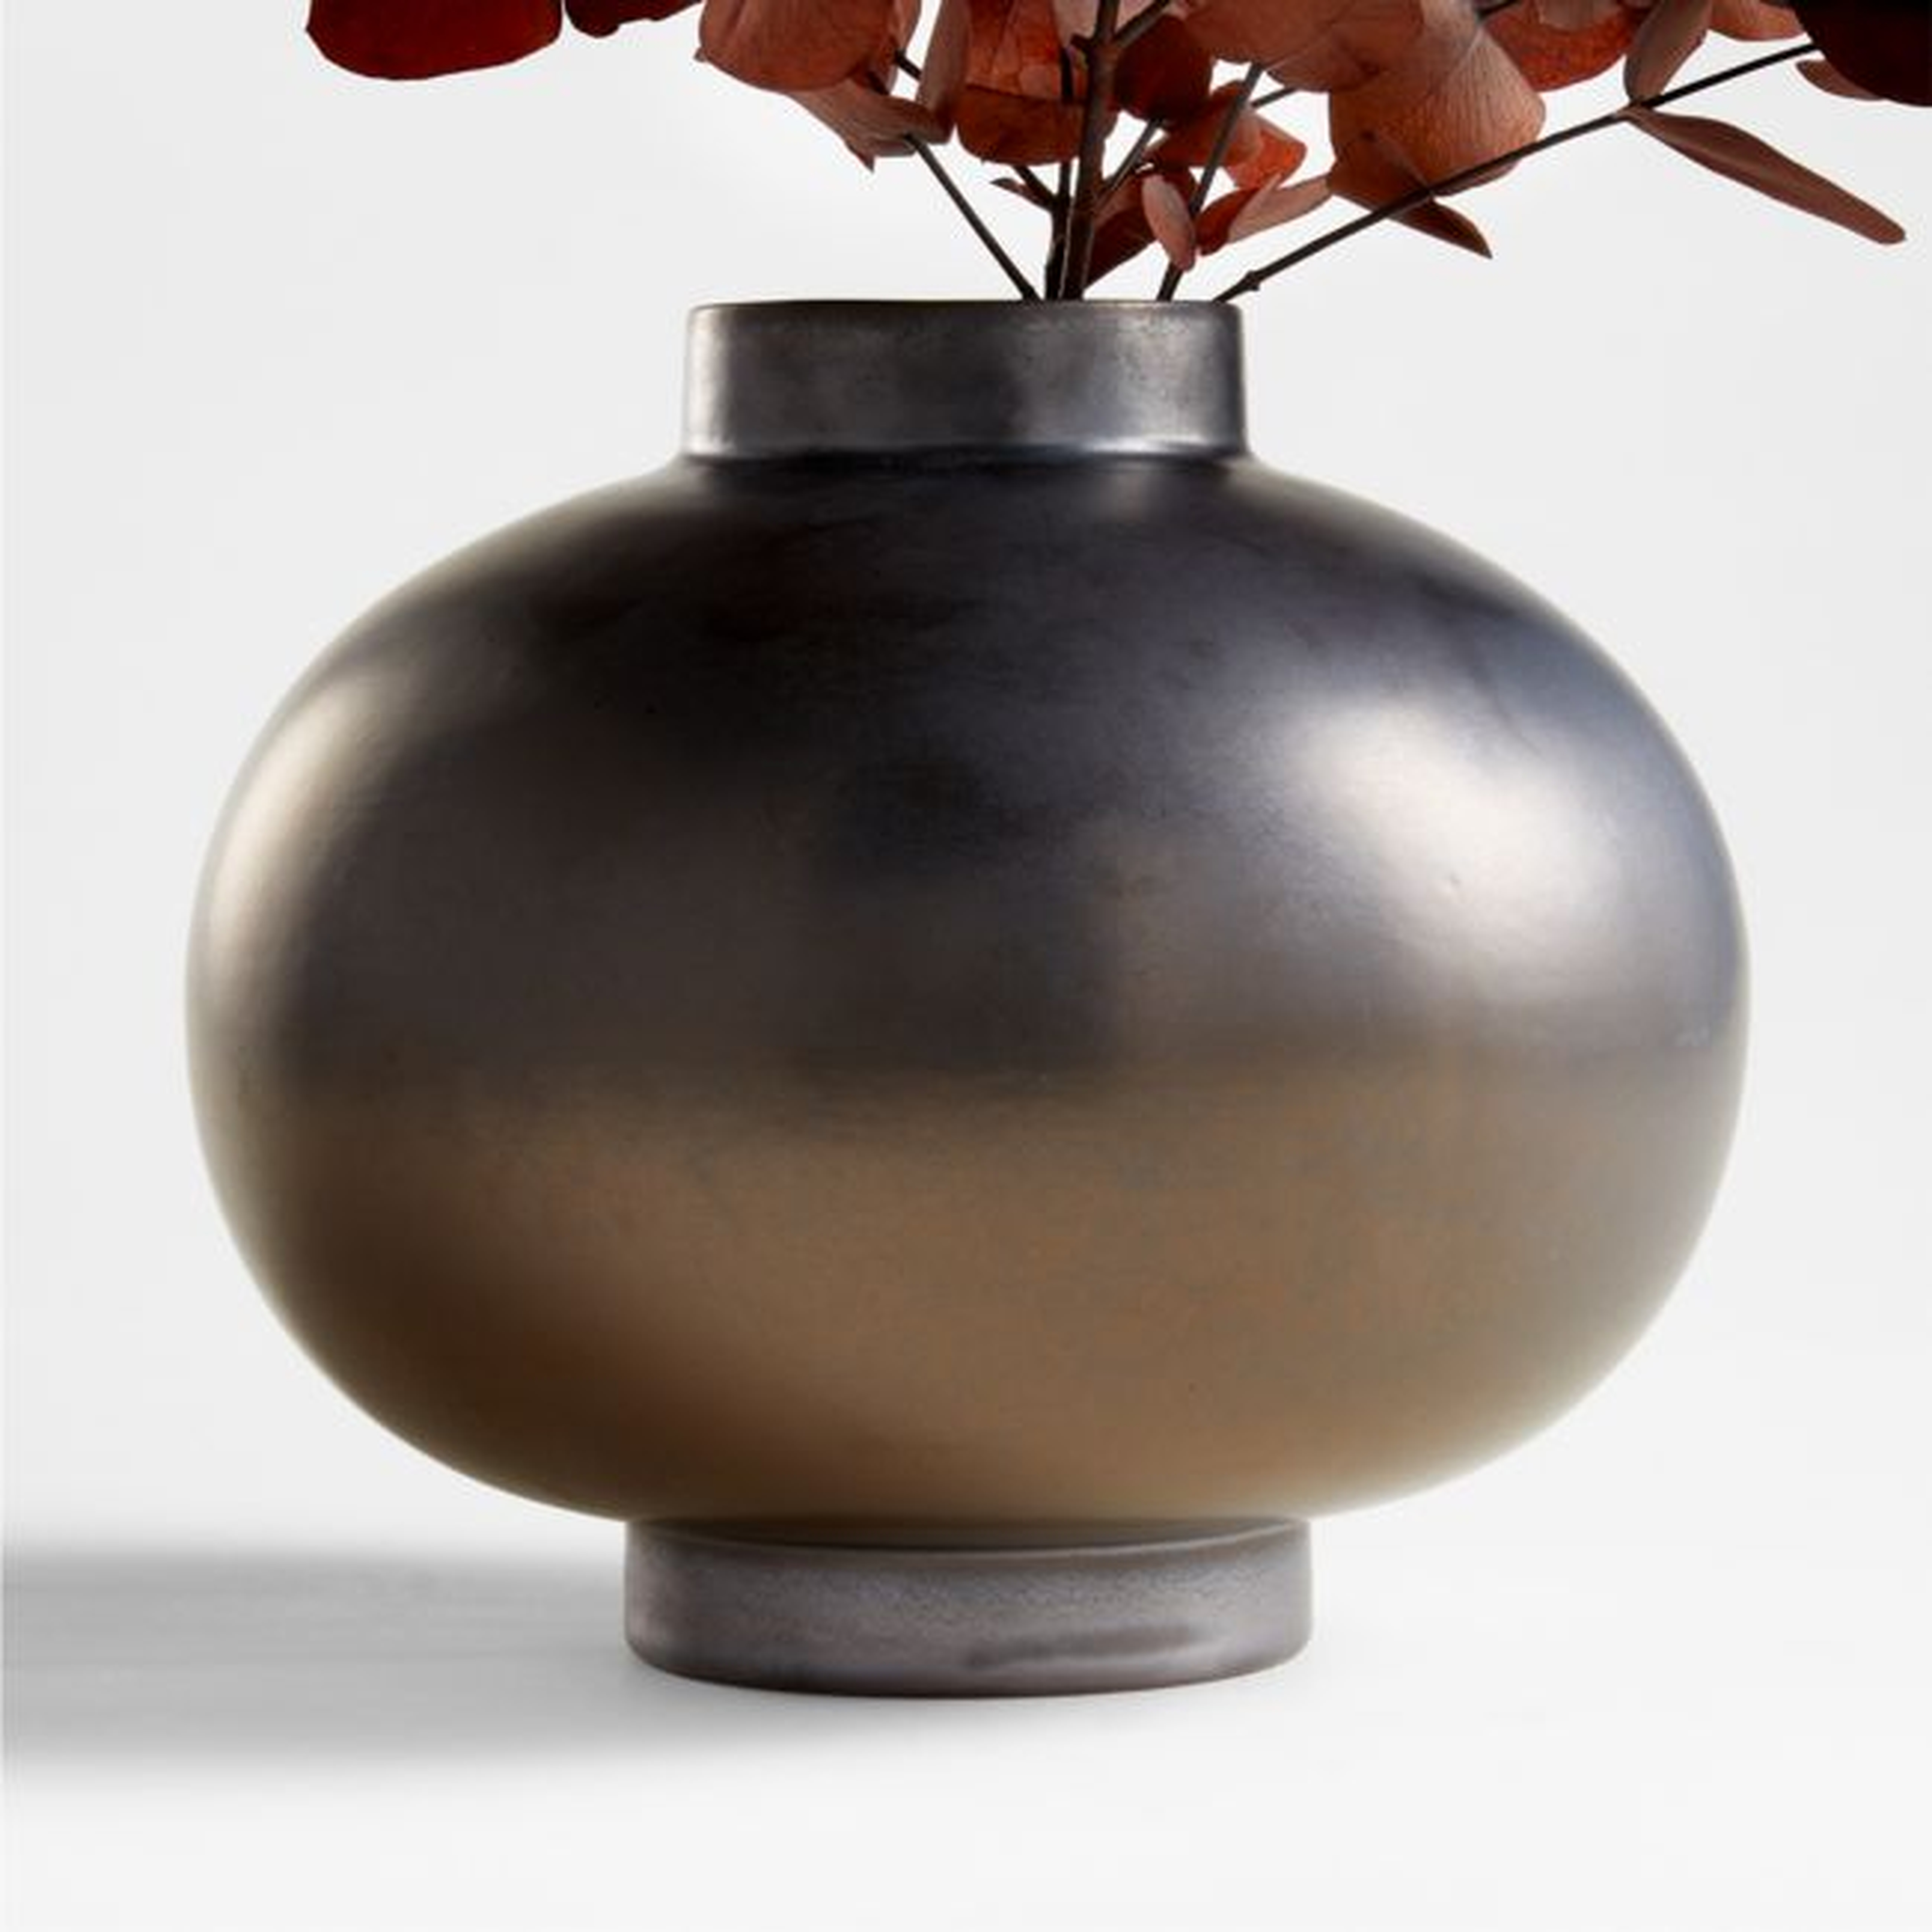 Full Moon Metallic Vase by Leanne Ford - Crate and Barrel